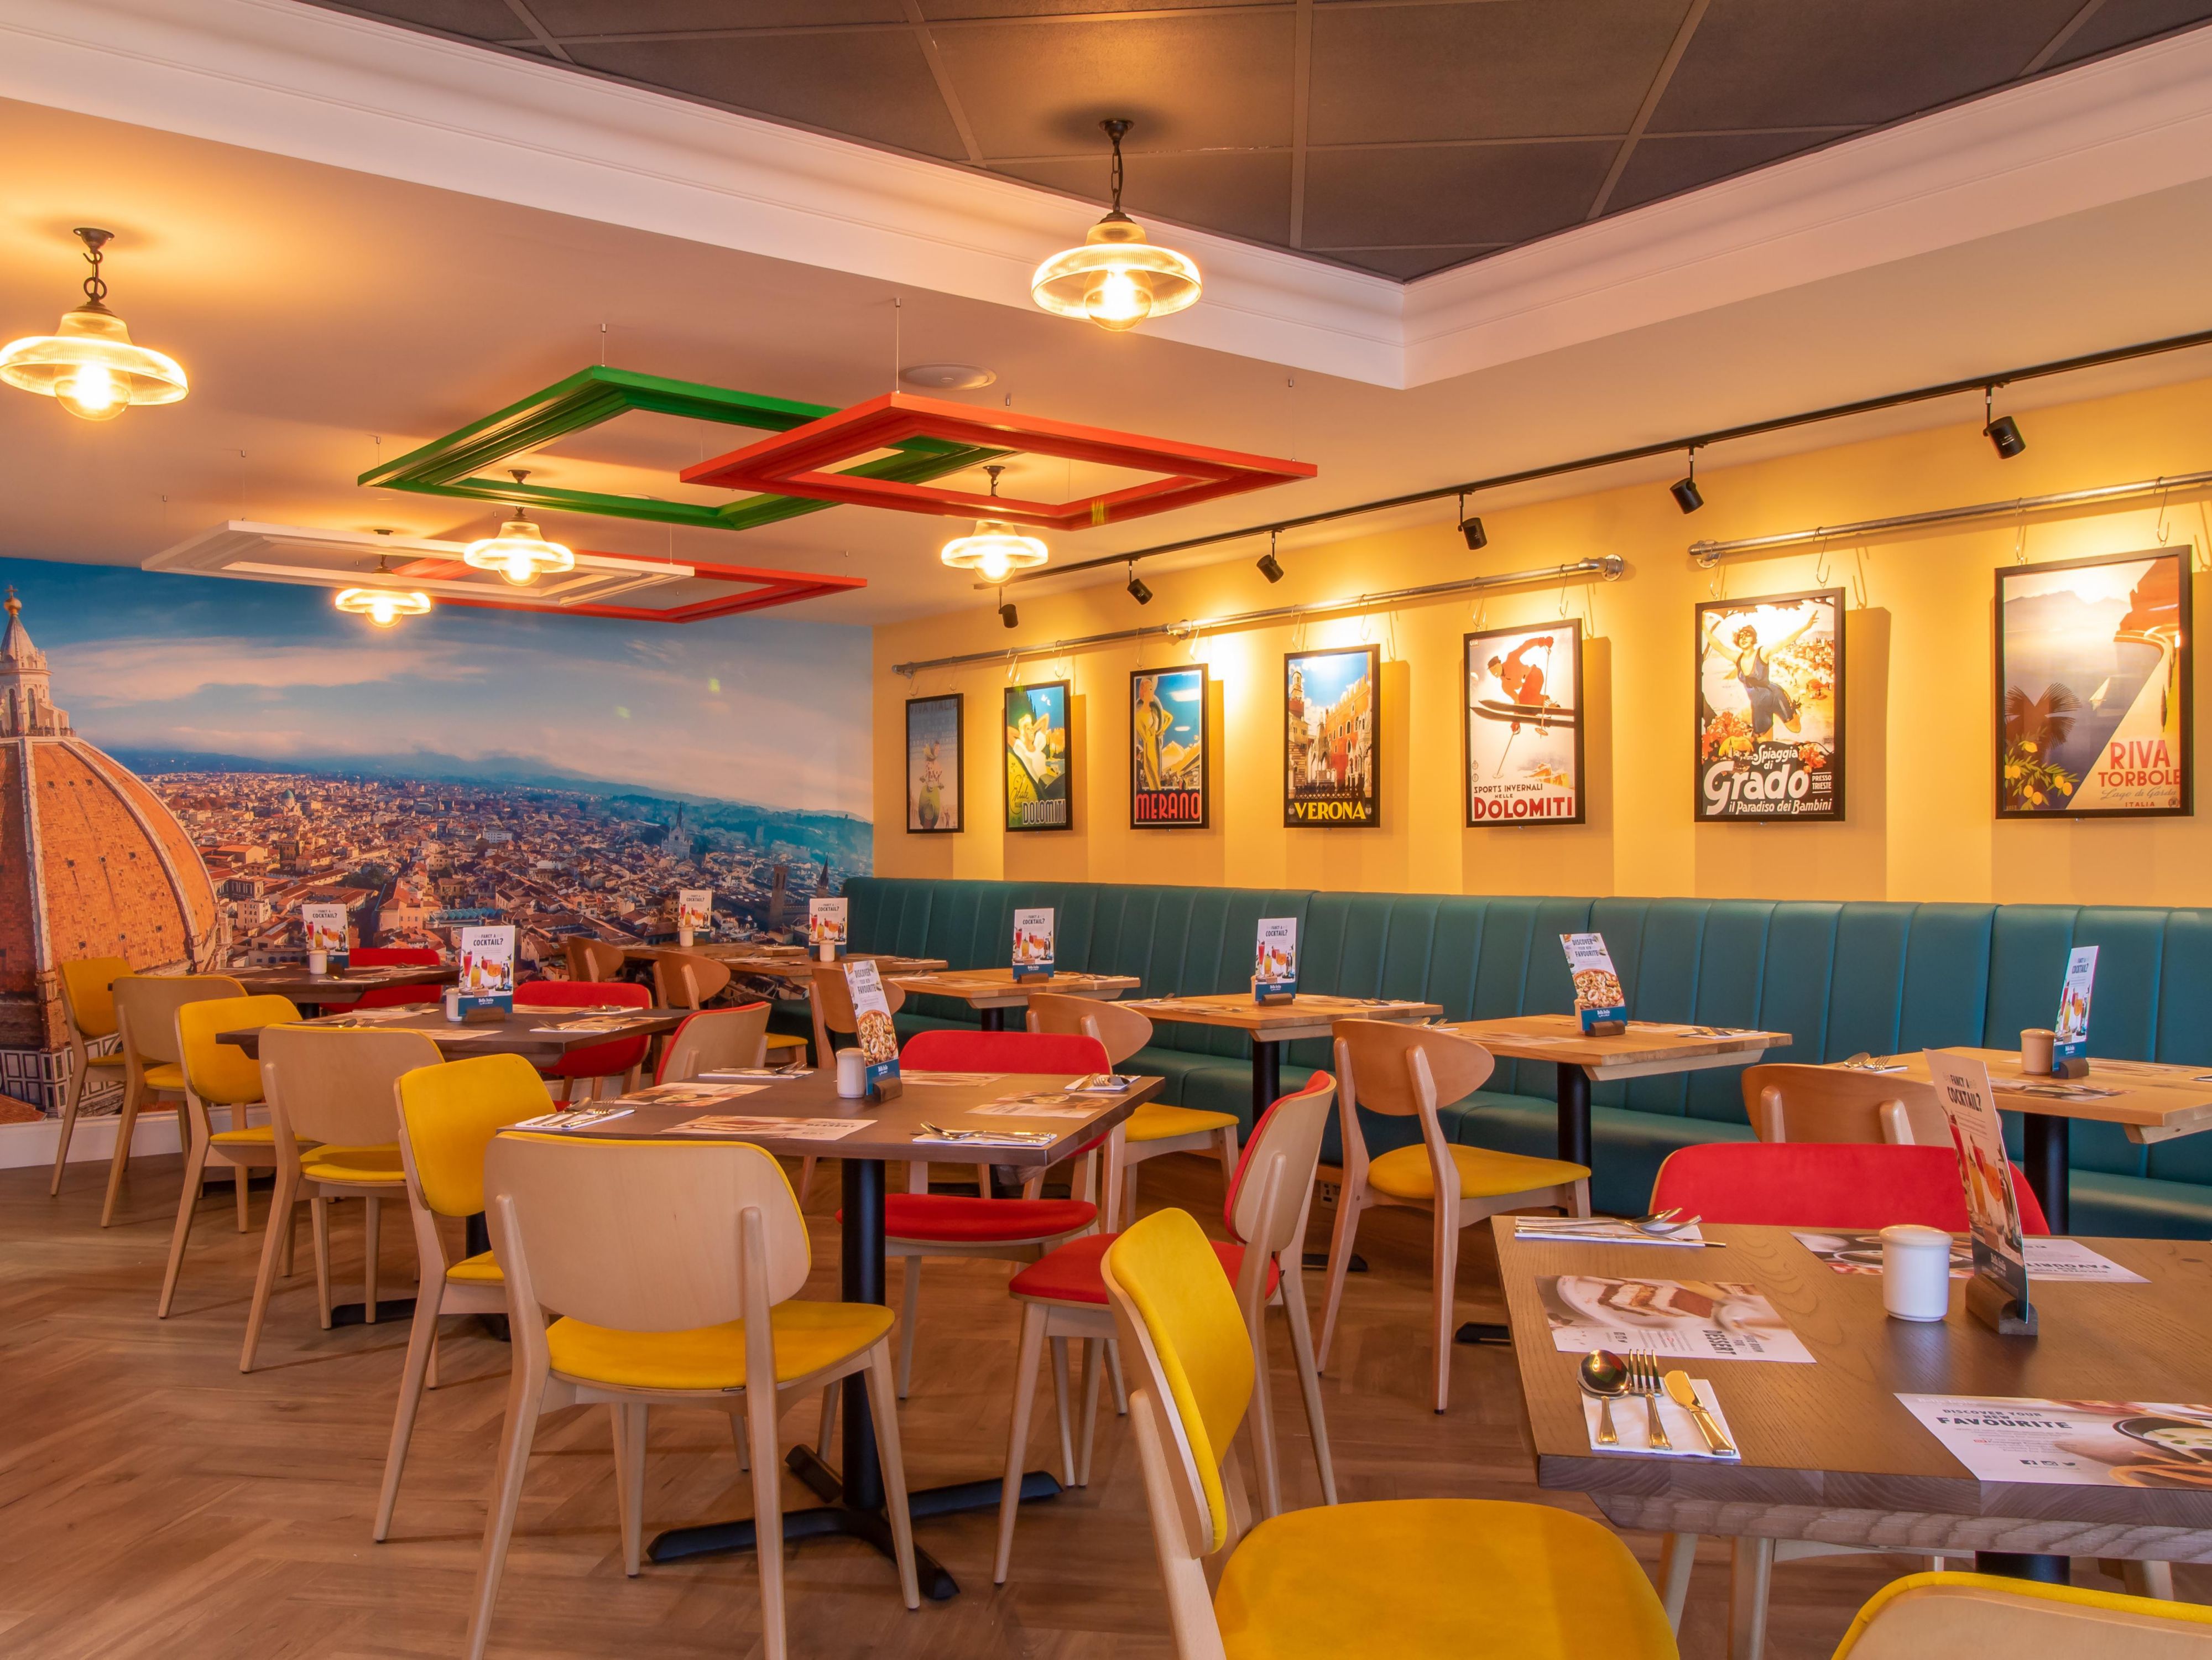 Bella Italia at Holiday Inn Leicester Wigston is an Italian restaurant which offers an extensive menu of Italian dishes made from locally sourced ingredients.